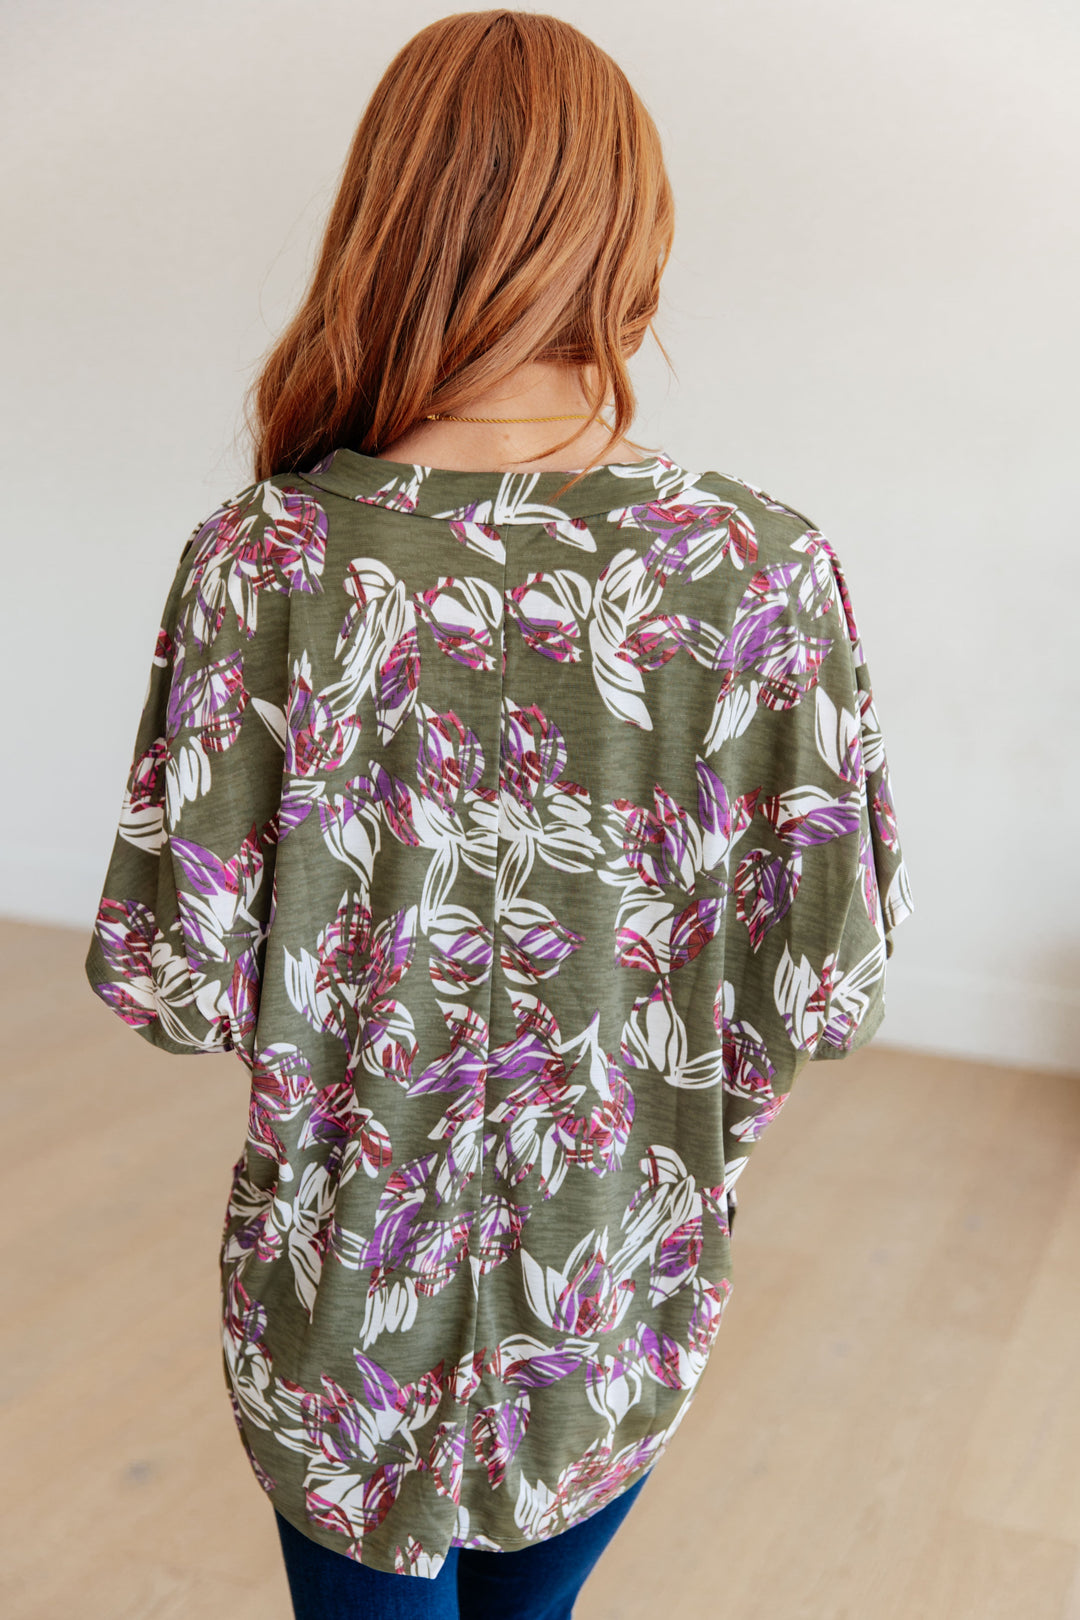 Ready to Bloom Floral V-Neck Top